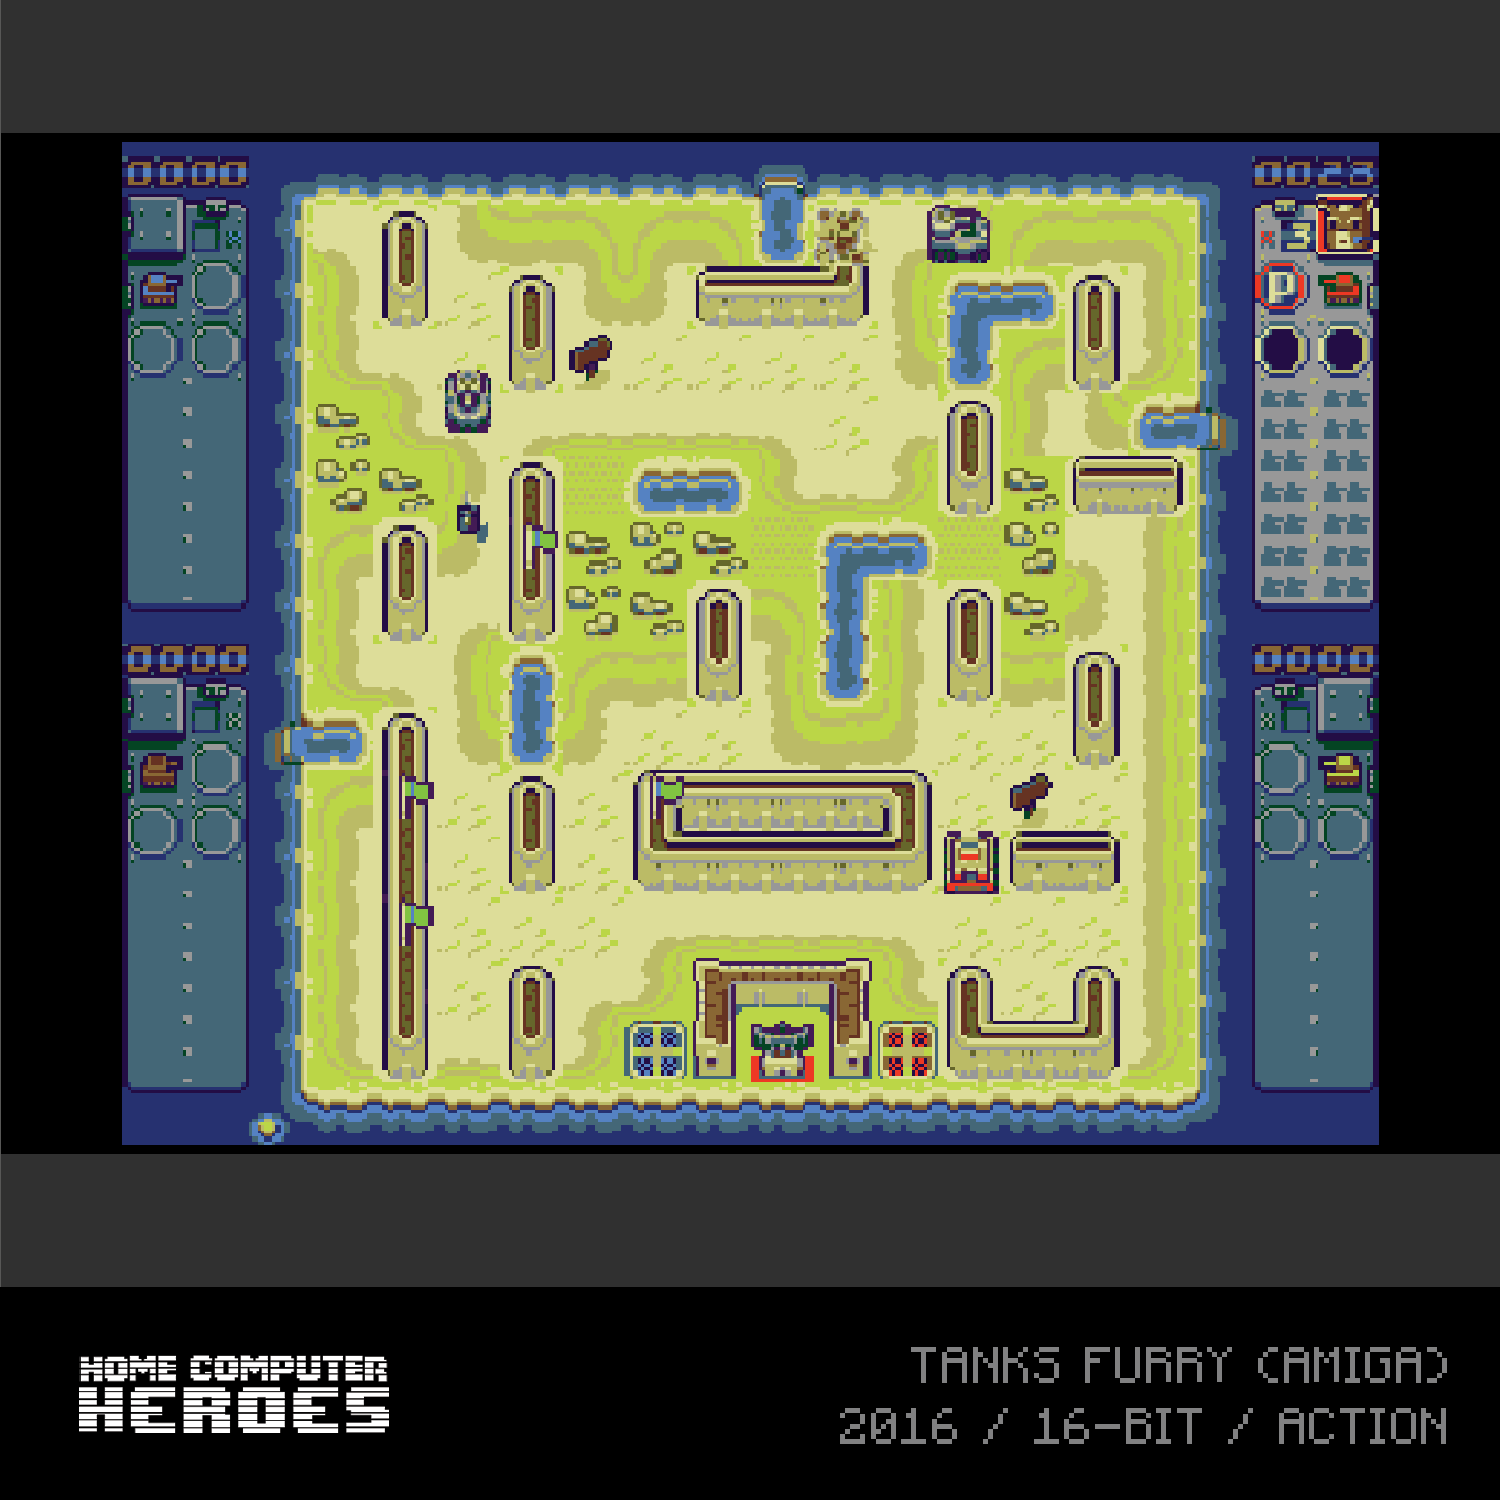 #C05 Home Computer Heroes Collection 1 - Evercade Cartridge